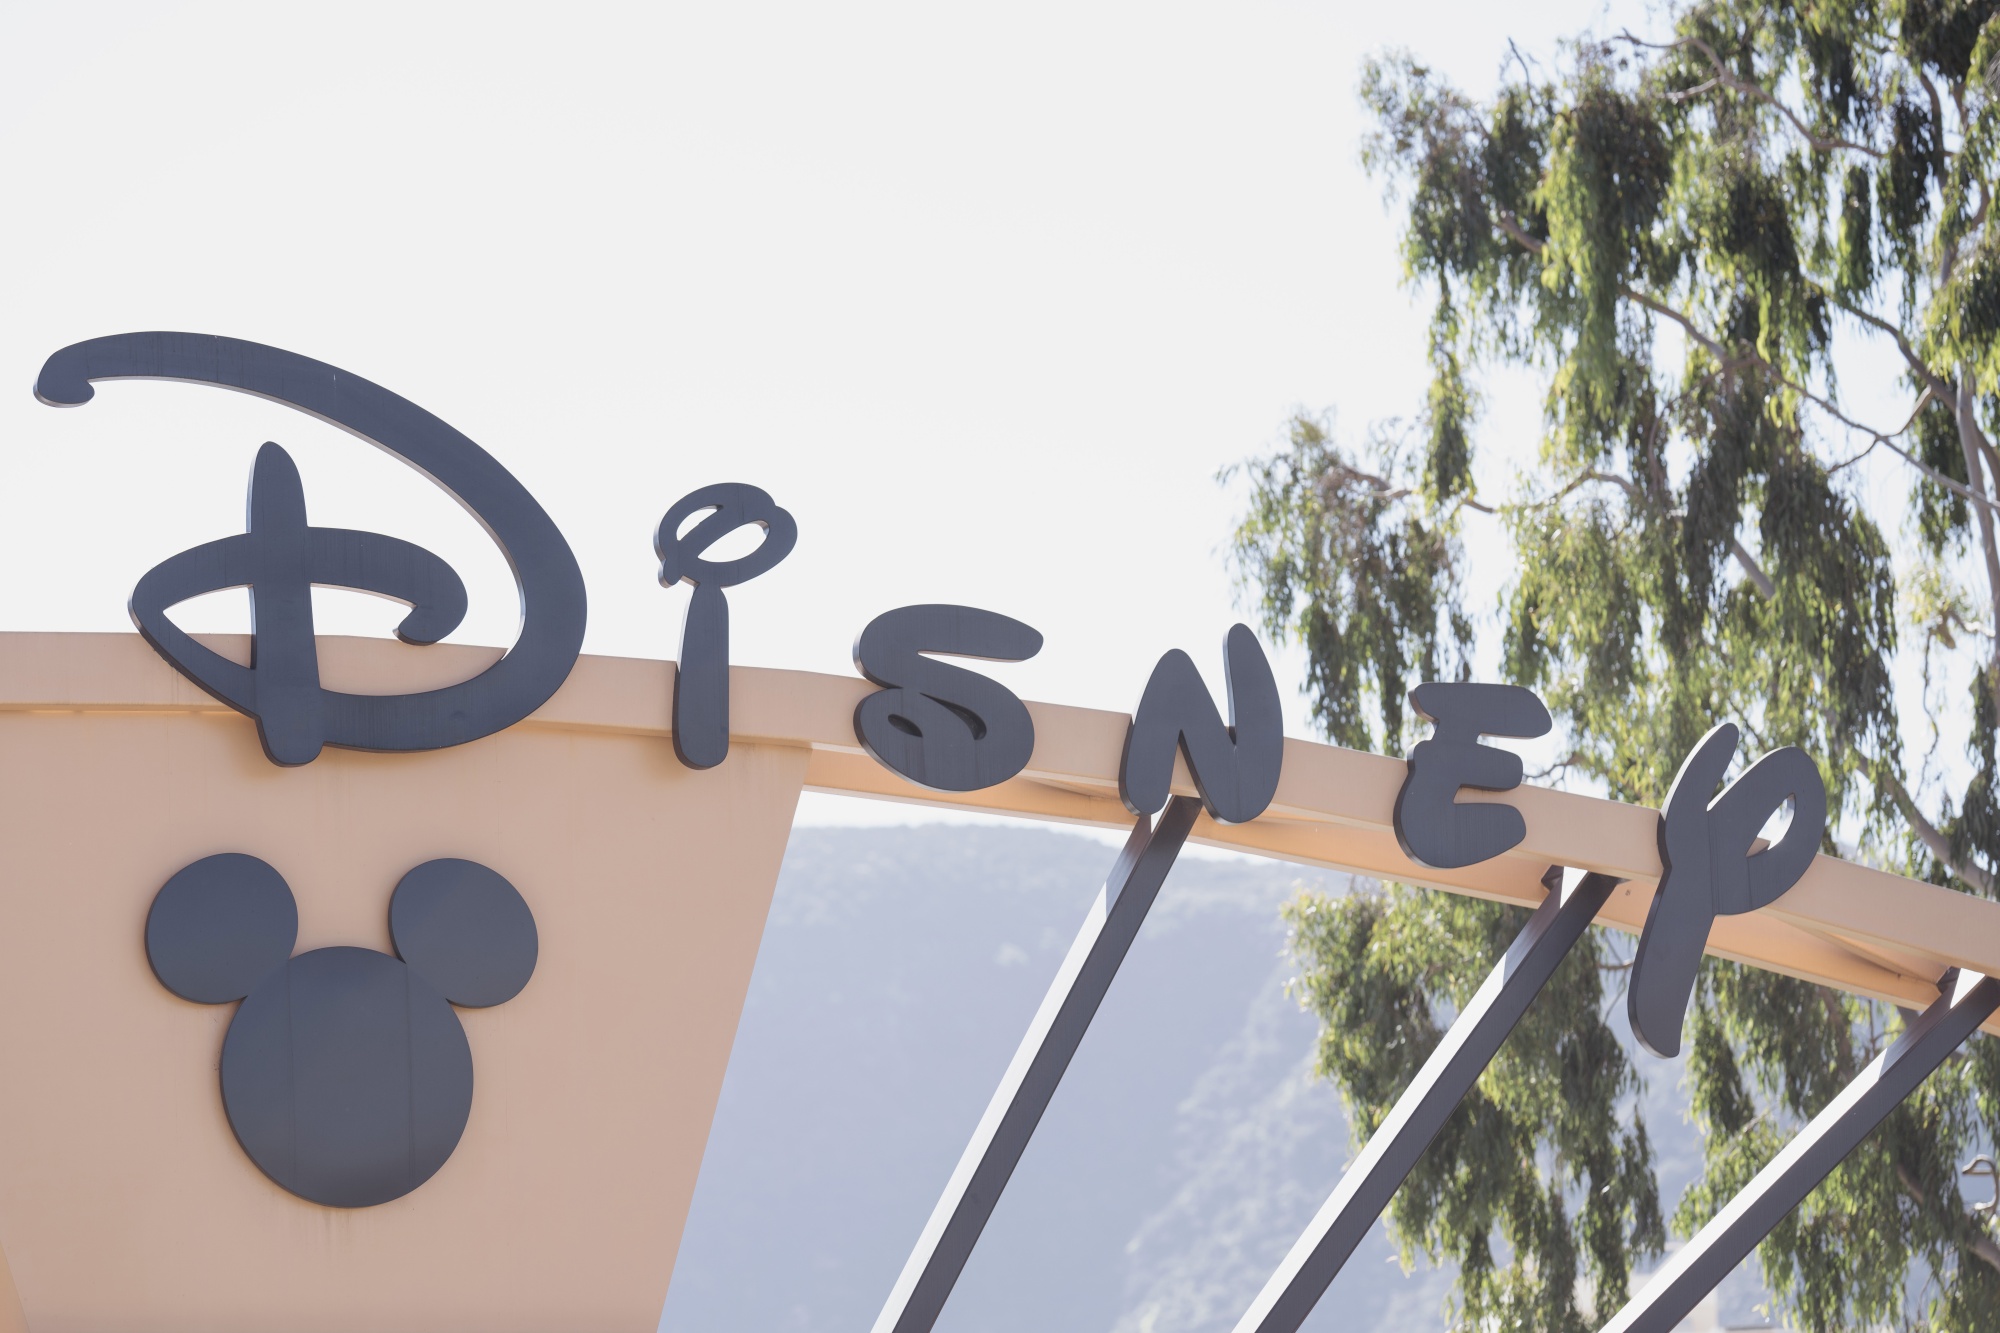 Walt Disney&nbsp;Co. Chief Executive Officer Bob Iger faces a board proxy fight from activist investors at Wednesday’s shareholder meeting.